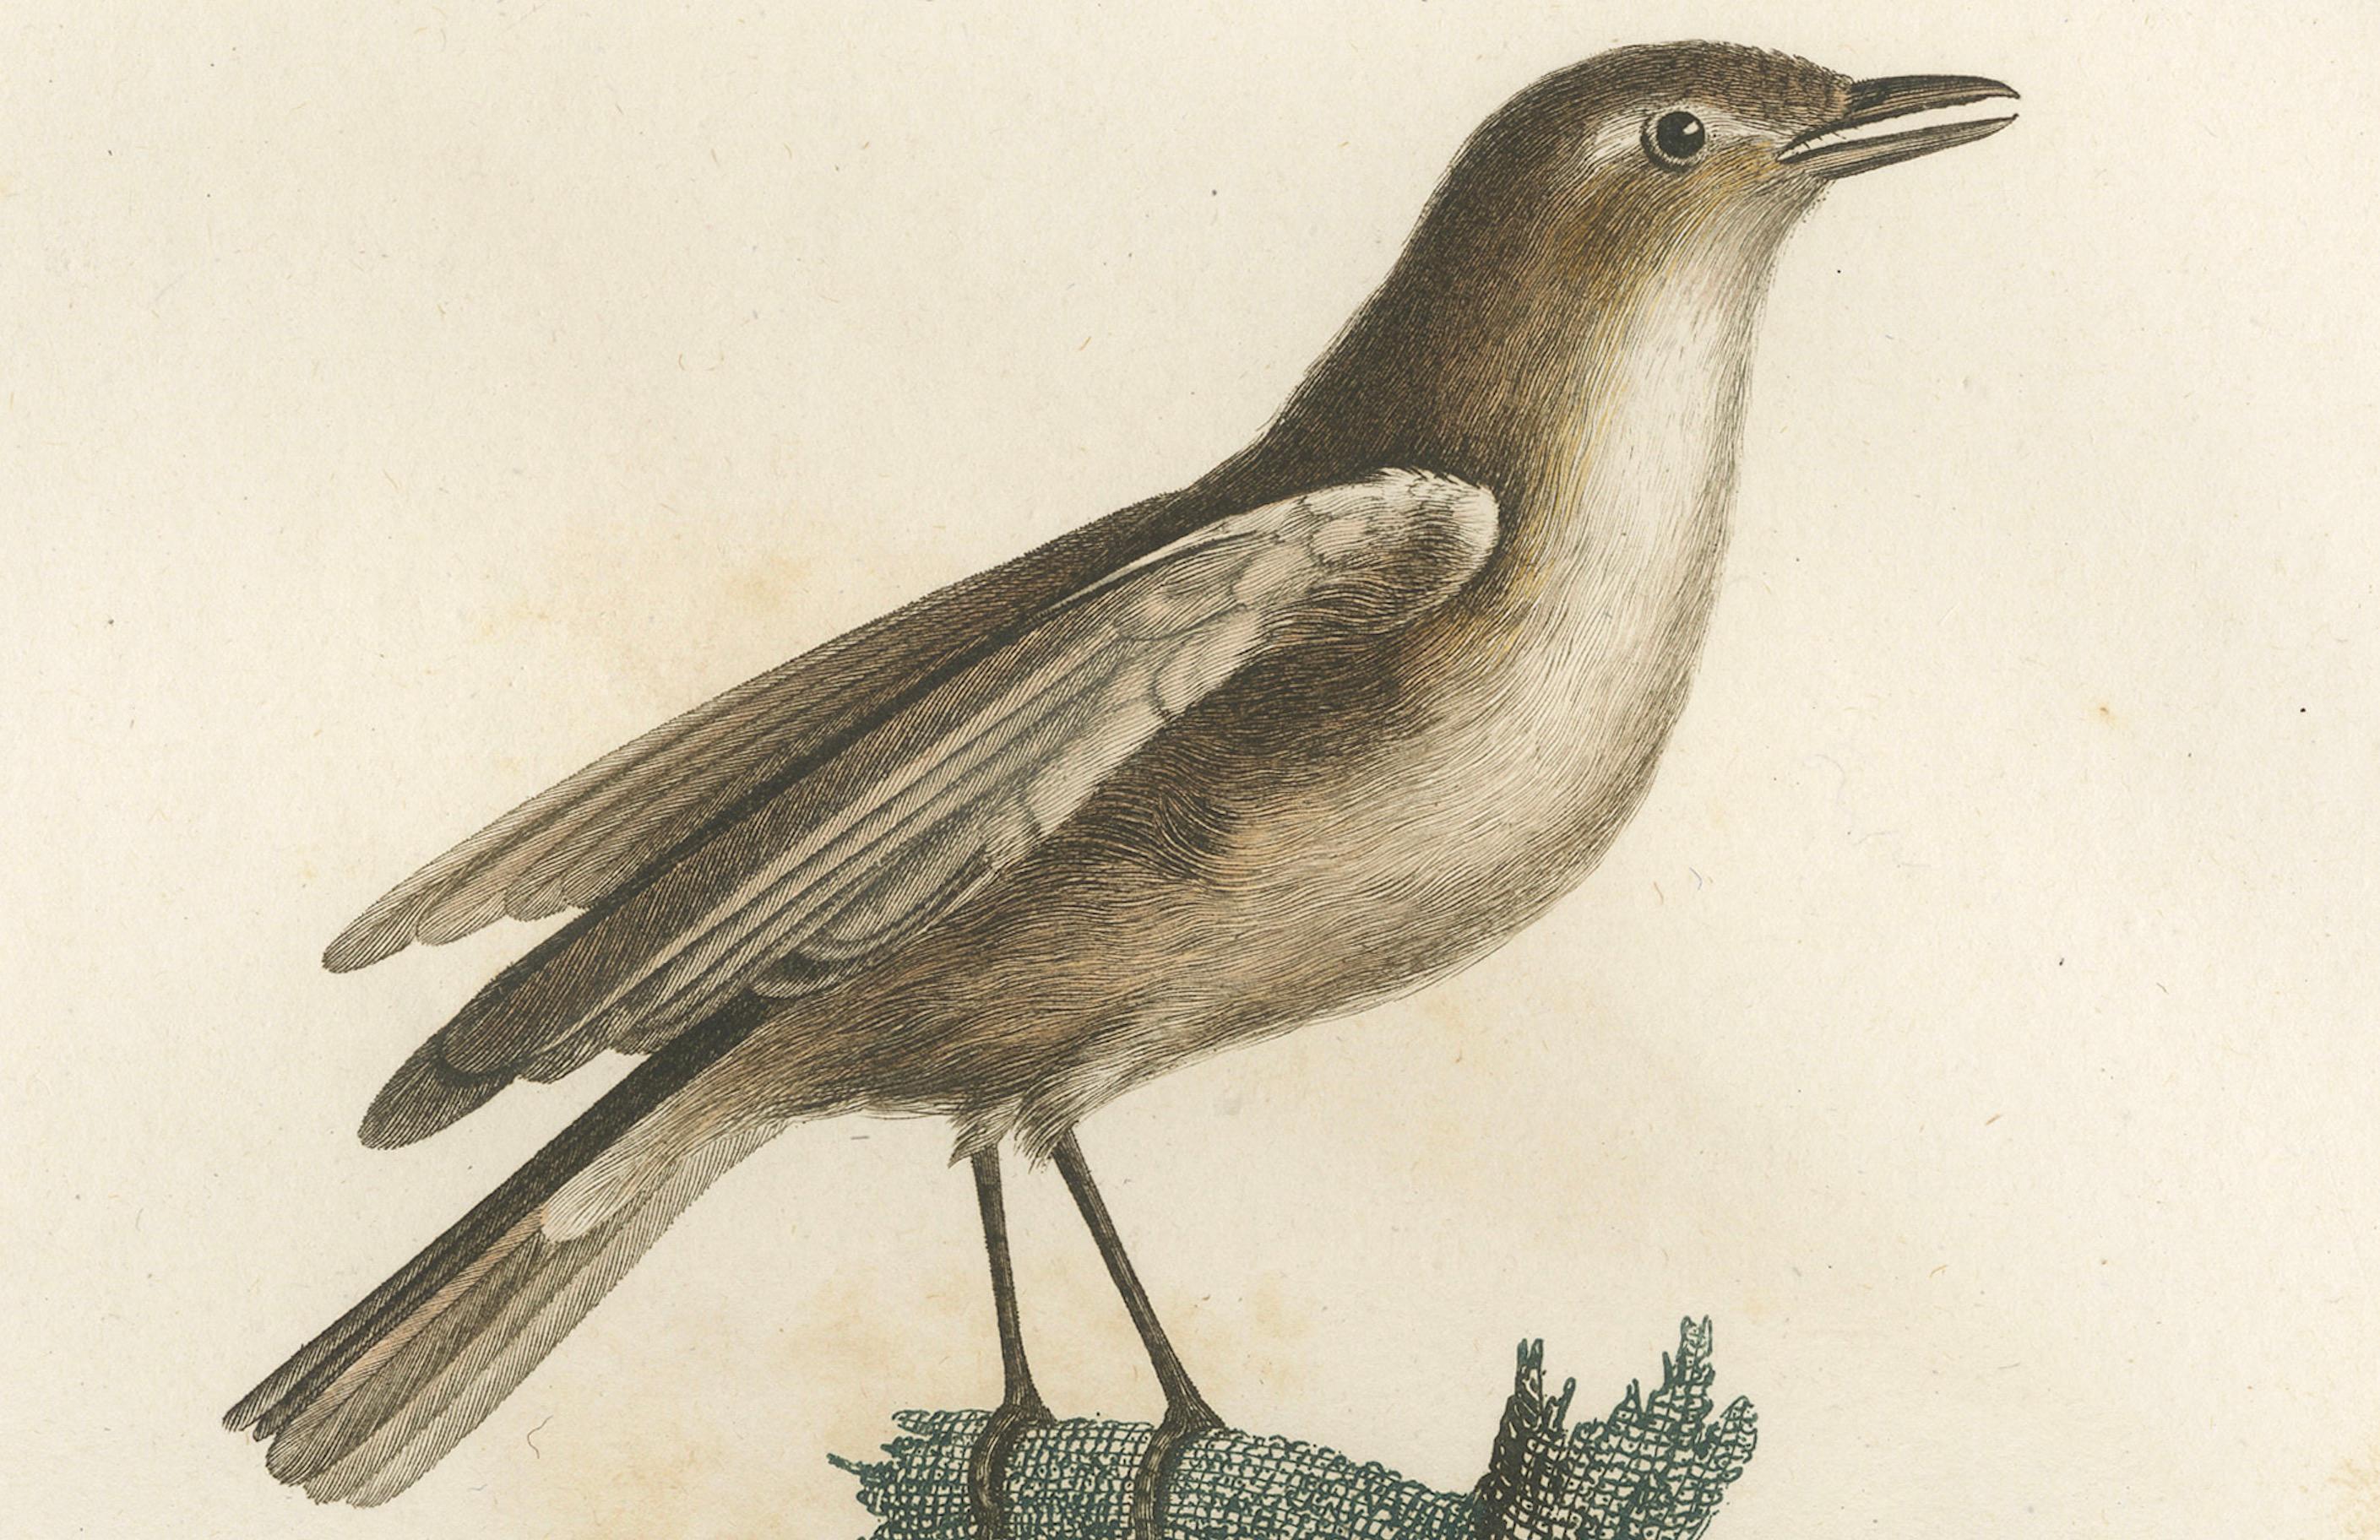 This antique bird print, titled 'Le Moucherolle gris', portrays the Gray Flycatcher, a bird known for its distinctive tail-dipping behavior which differentiates it from other Empidonax species. The flycatcher is illustrated perched on a branch, with